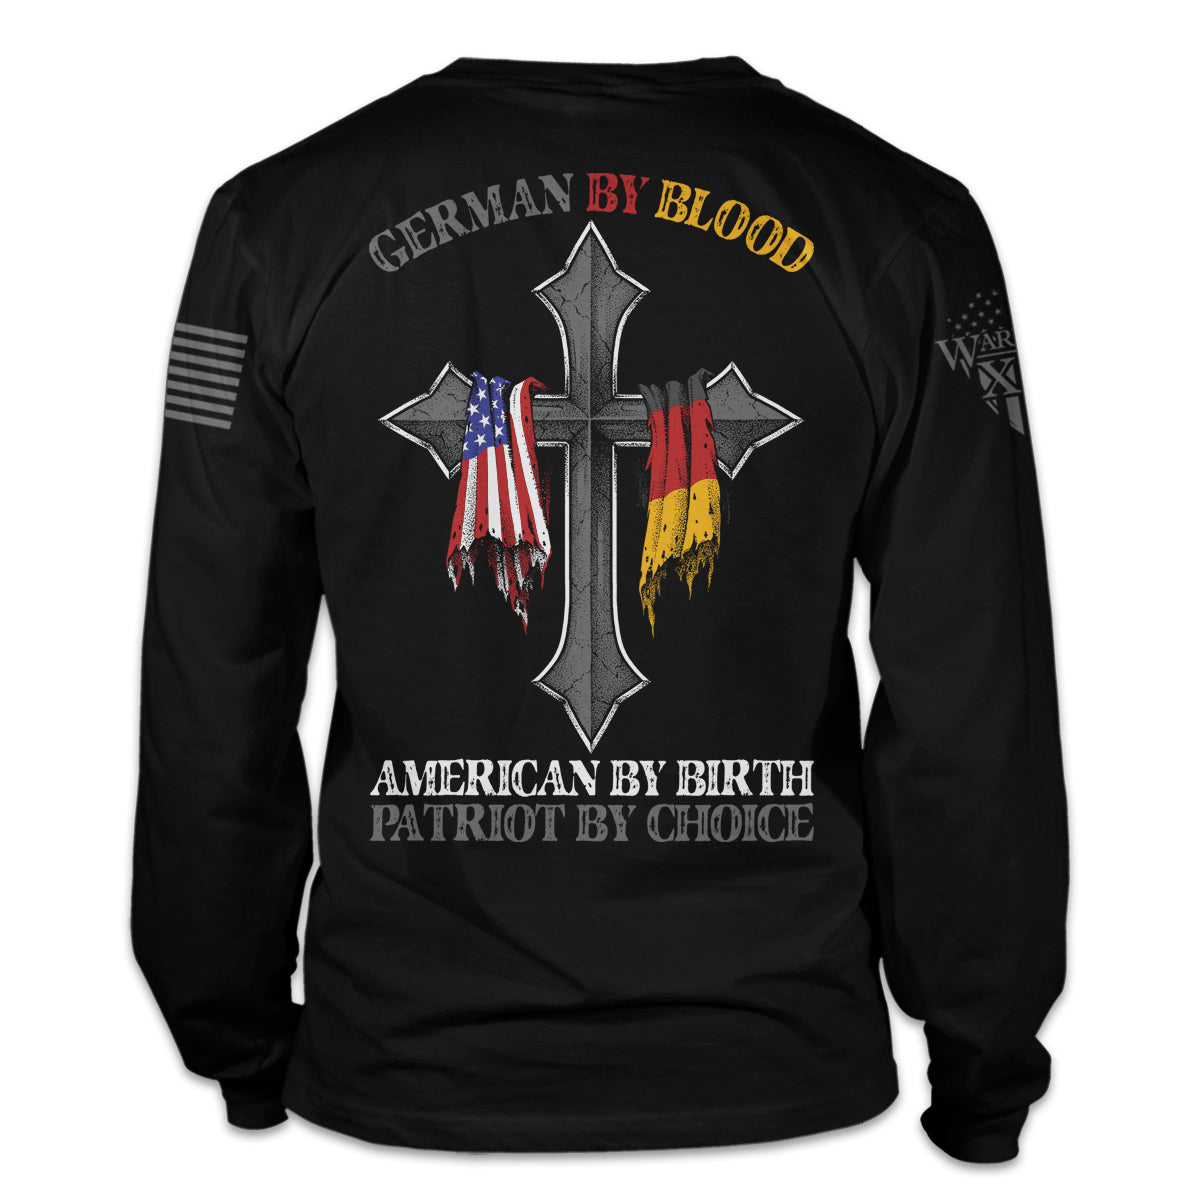 A black long sleeve shirt with the words 'German by blood, American by birth, patriot by choice" and a cross with the German and USA flag hanging over it printed on the back of the shirt.